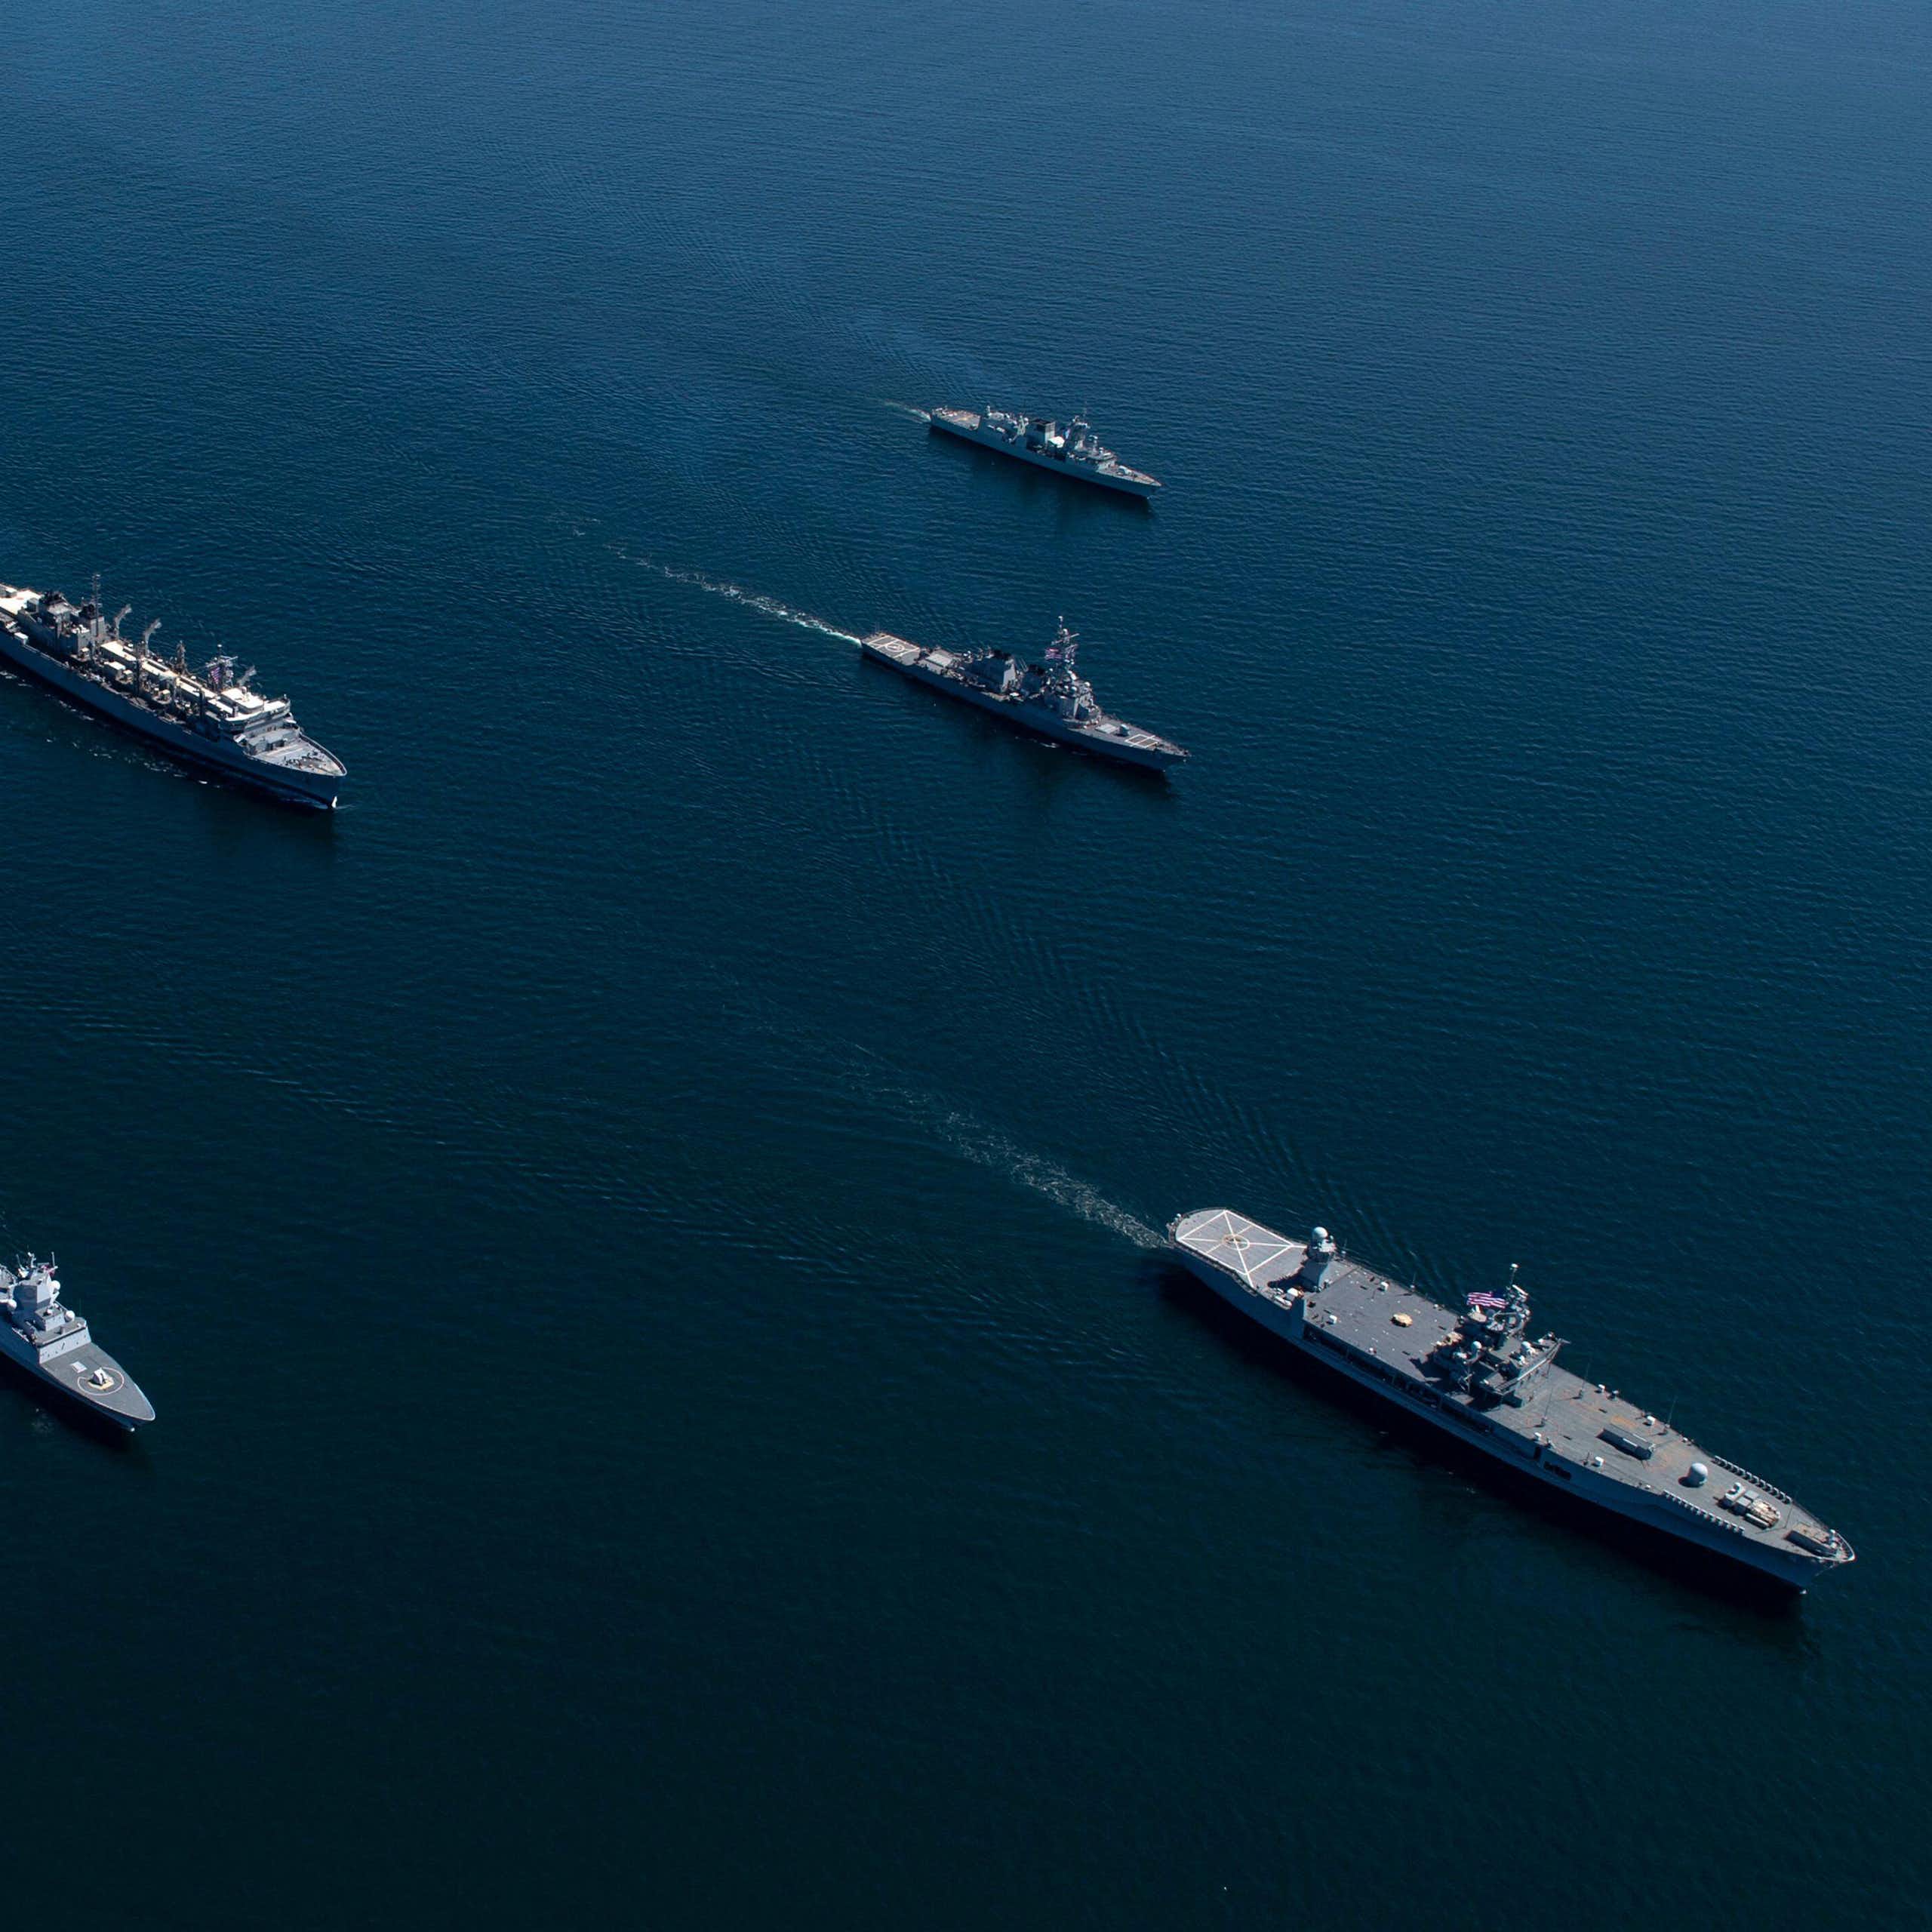 Overhead shot of navy ships in the Baltic.